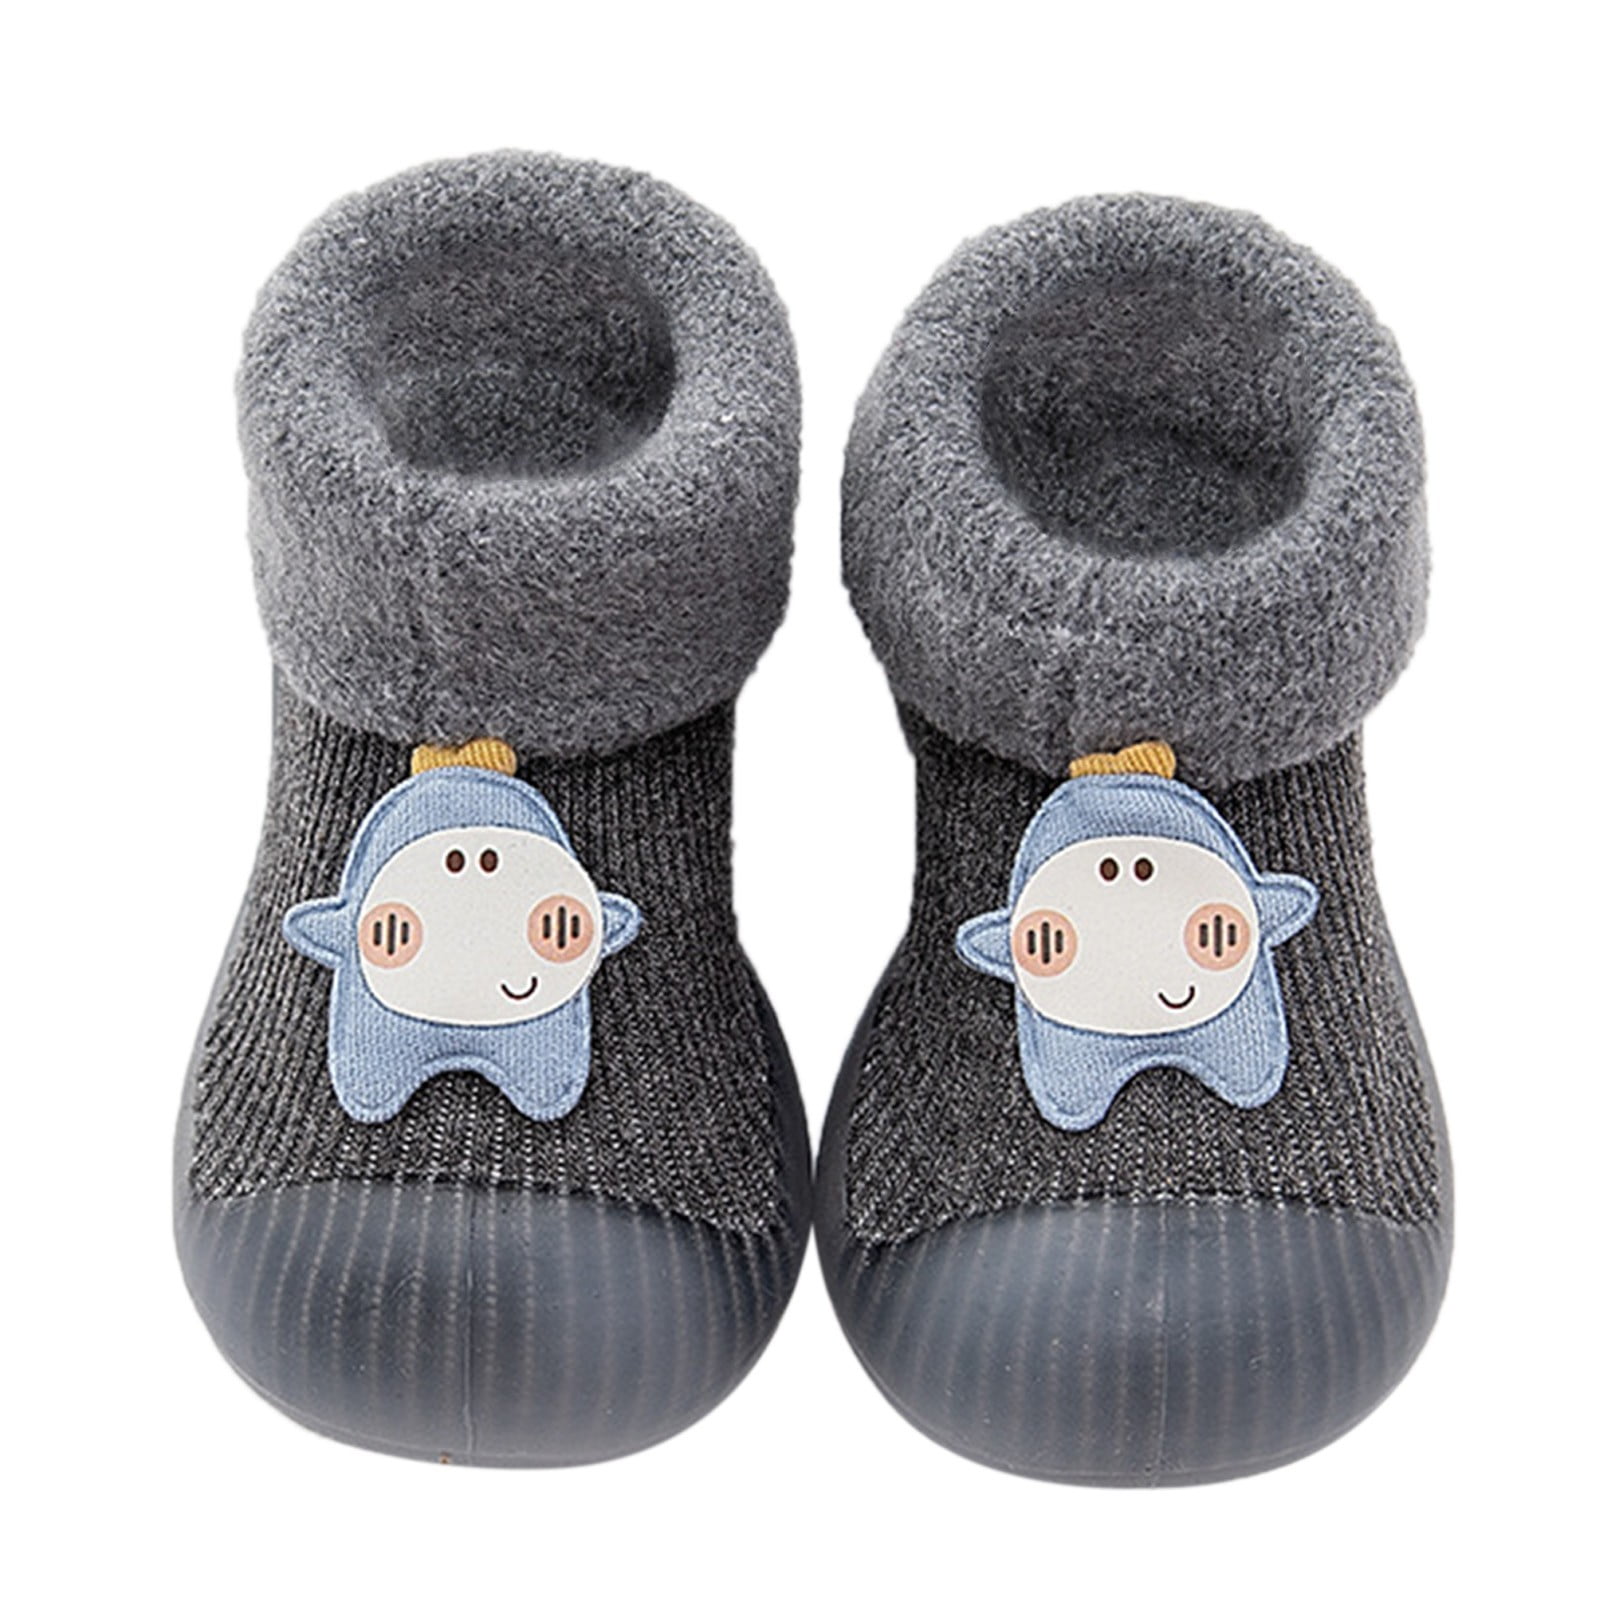 GYRATEDREAM Baby Booties Girl & Boy Infant Fleece Slippers - Soft Cozy and  Colorful Baby Shoes 0-6 Months - Walmart.com